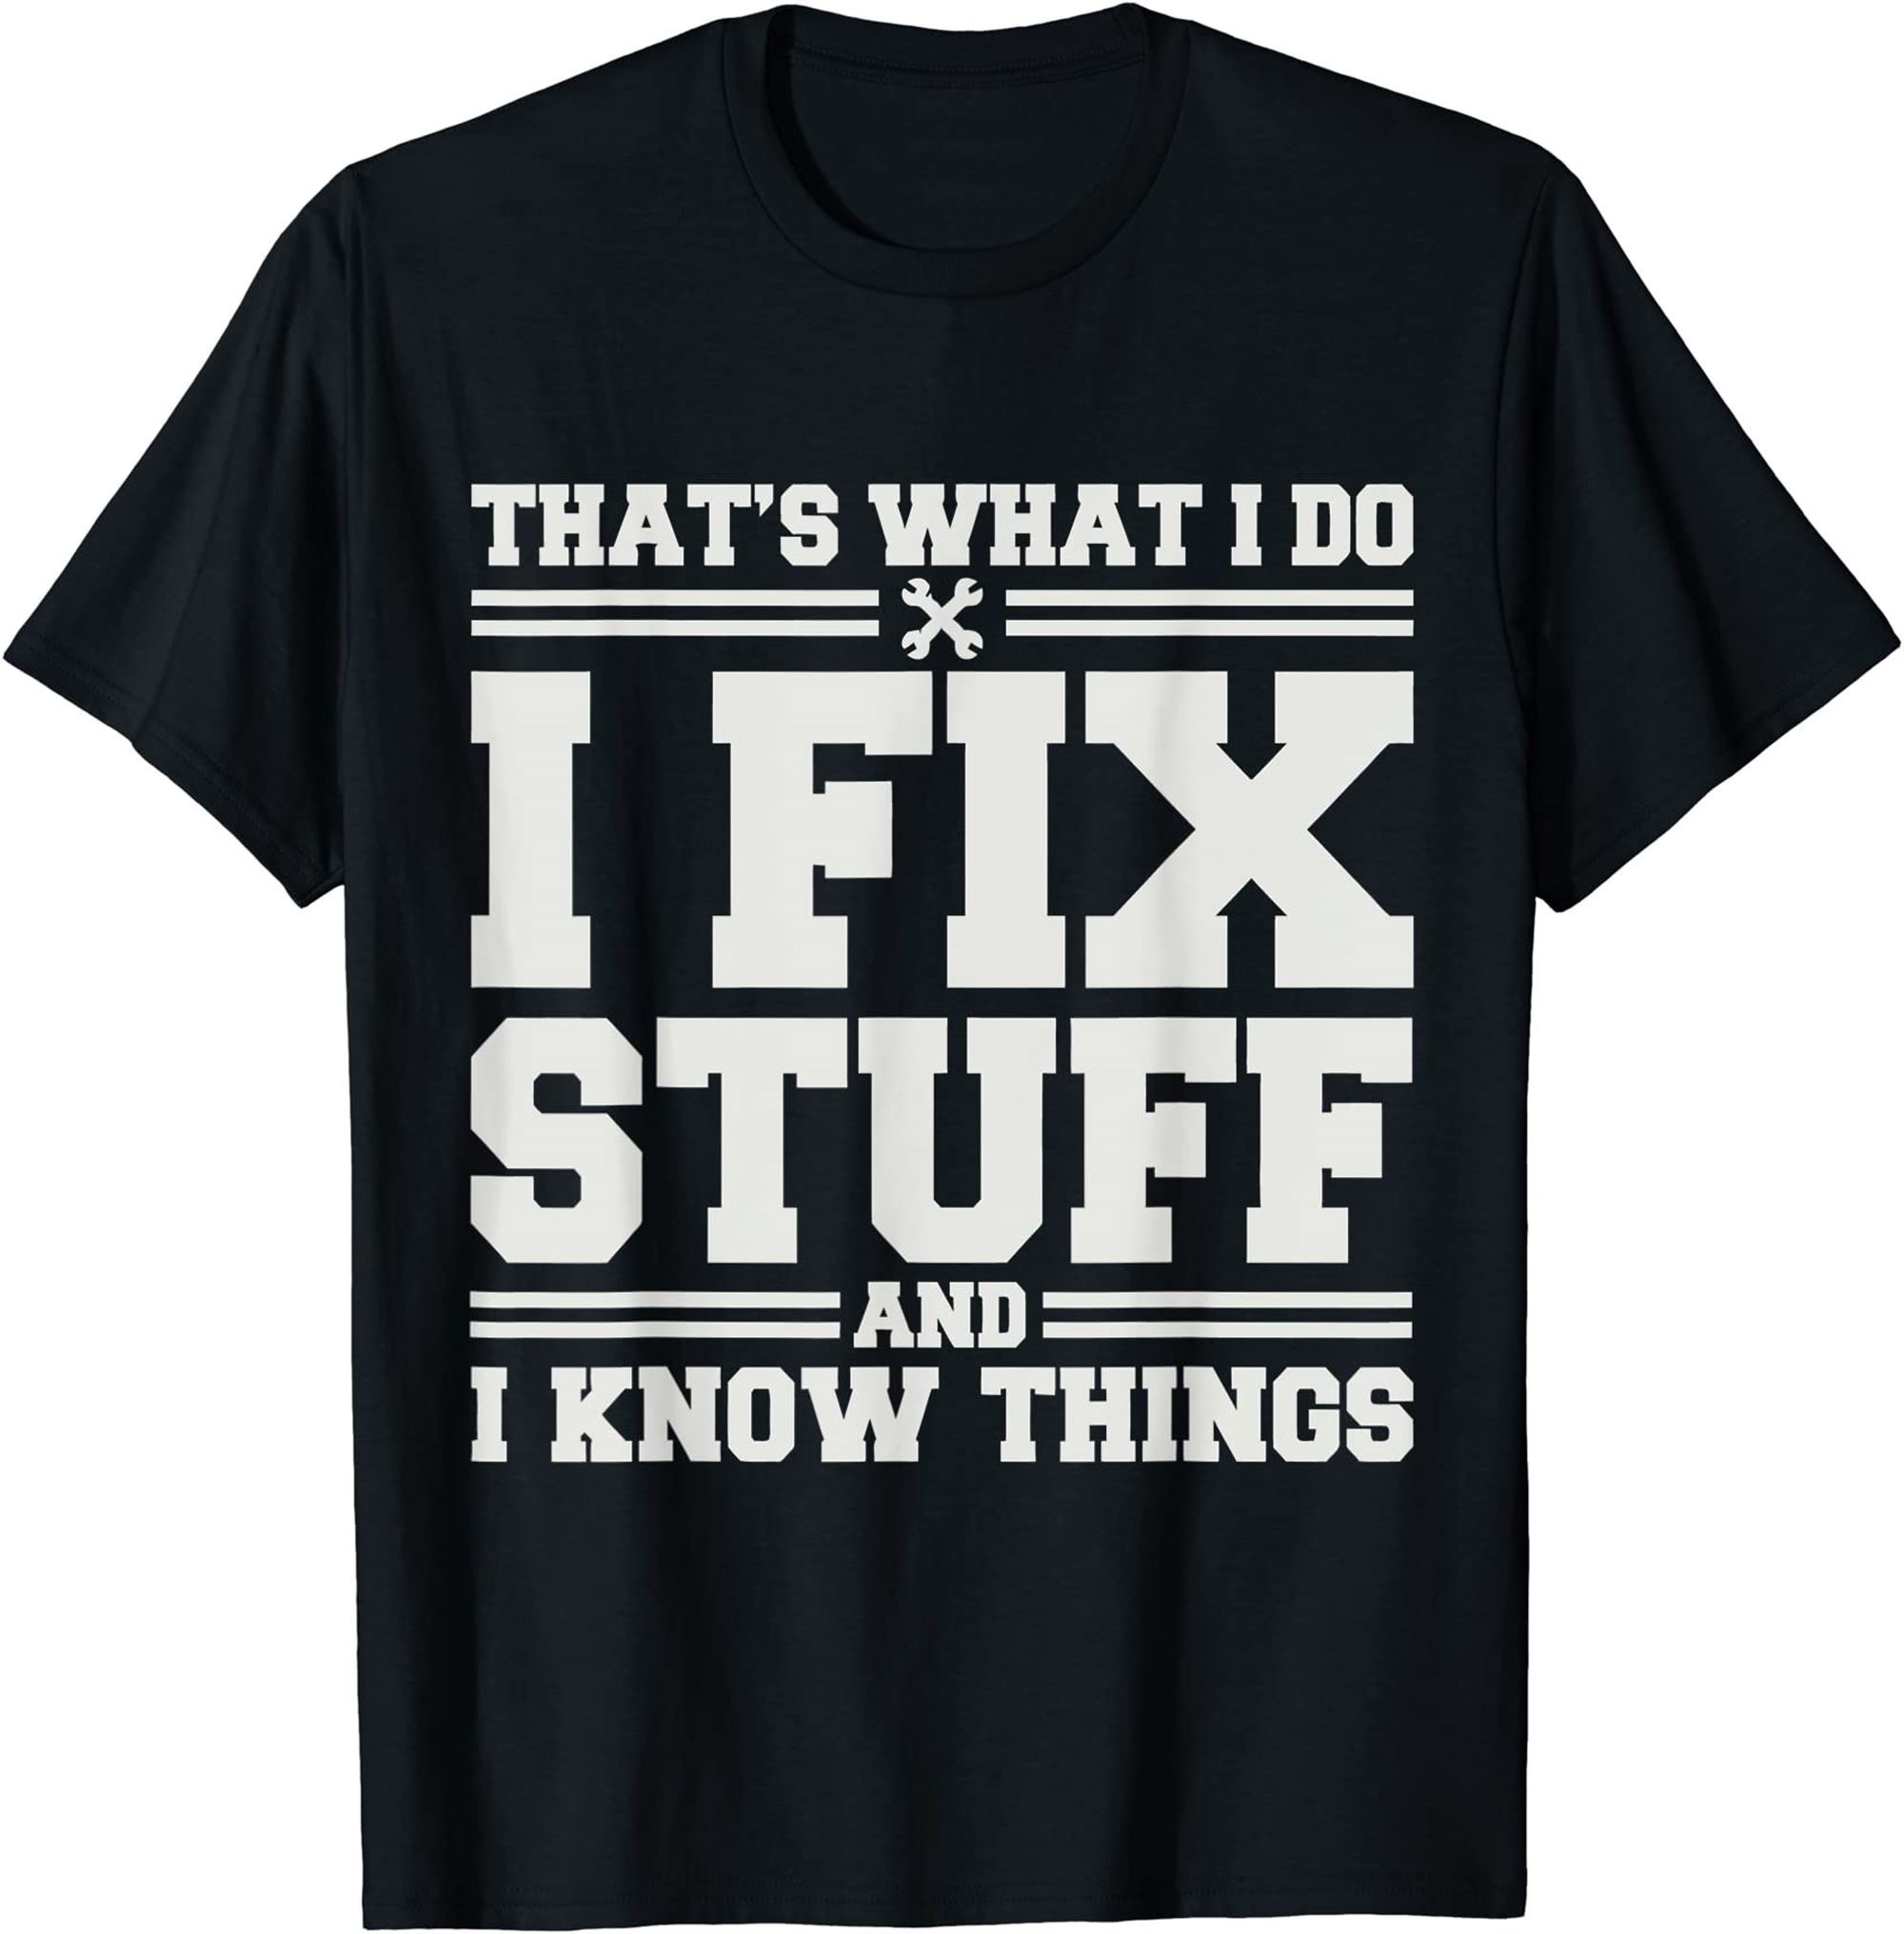 Thats What I Do I Fix Stuff And I Know Things Funny Saying T-shirt Plus Size Up To 5xl